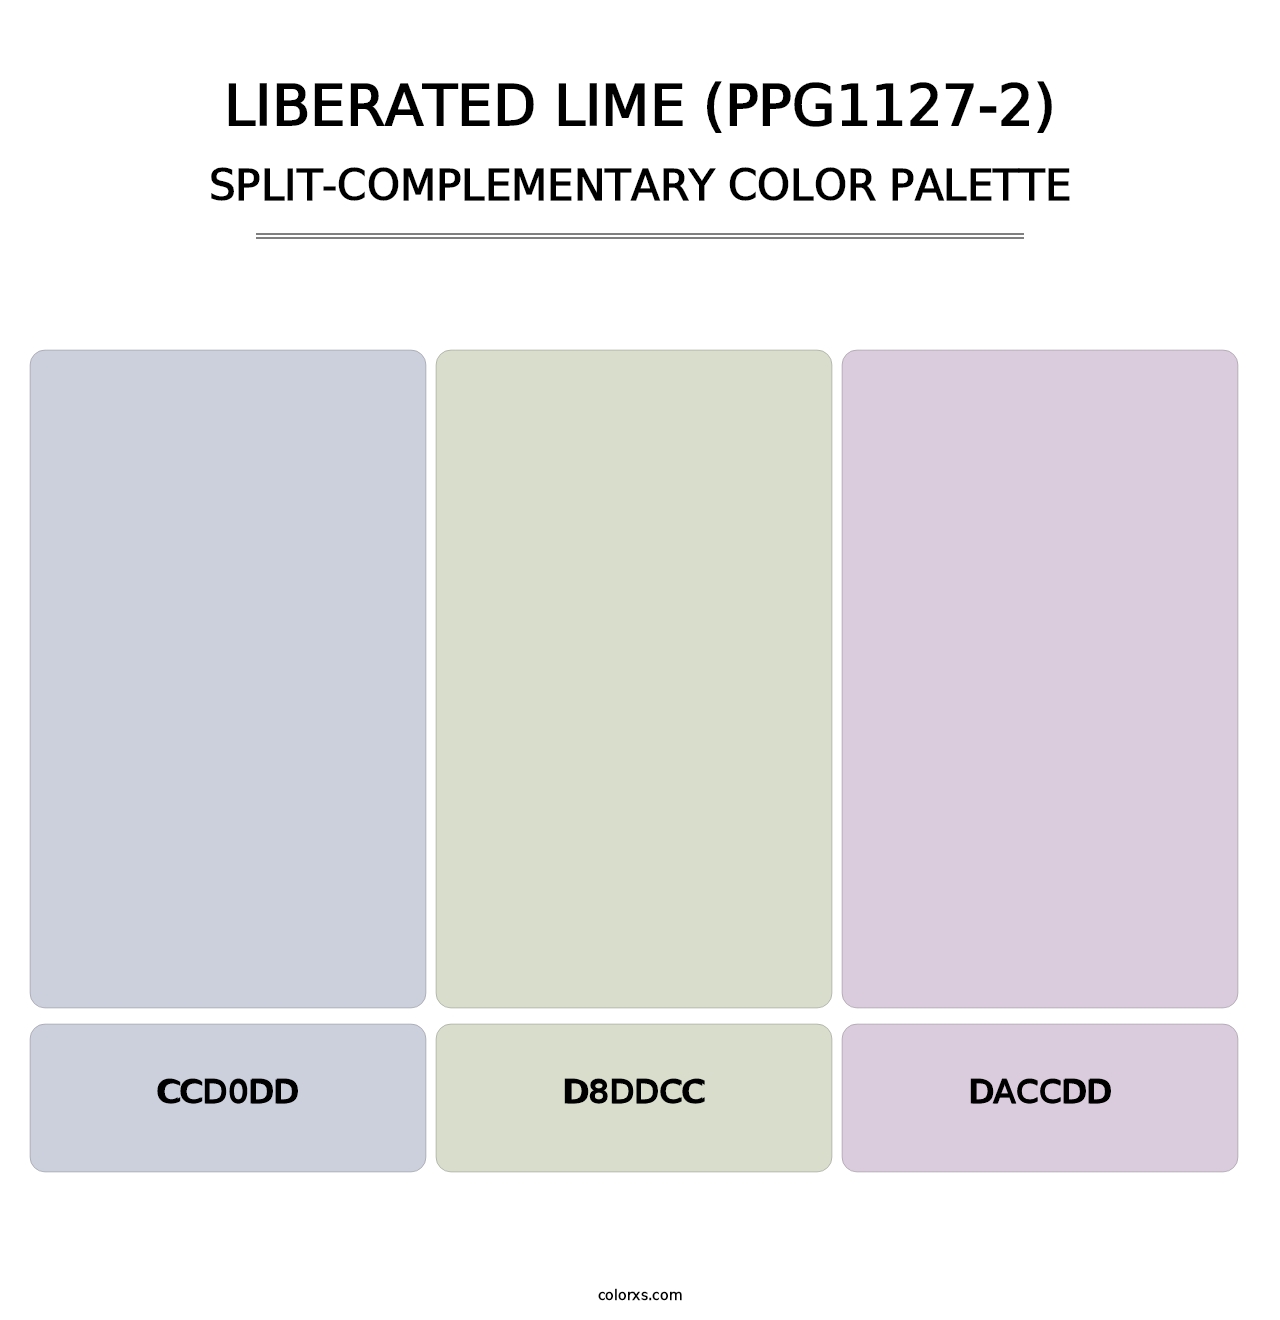 Liberated Lime (PPG1127-2) - Split-Complementary Color Palette